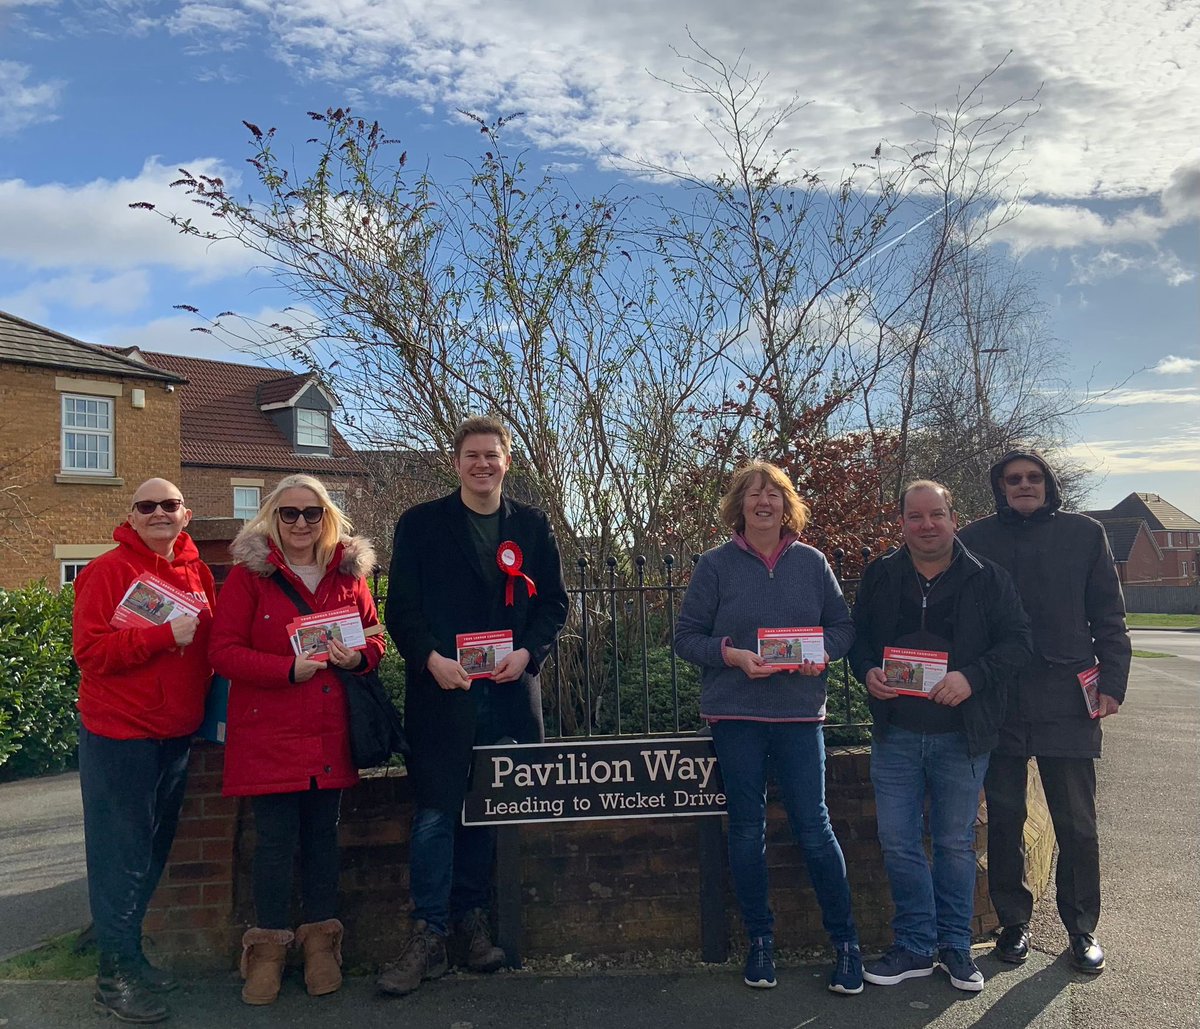 Lovely morning out speaking to residents on the Cricketers Estate! Some great support for Labour and local casework picked up by councillors. 🌹 #labourdoorstep